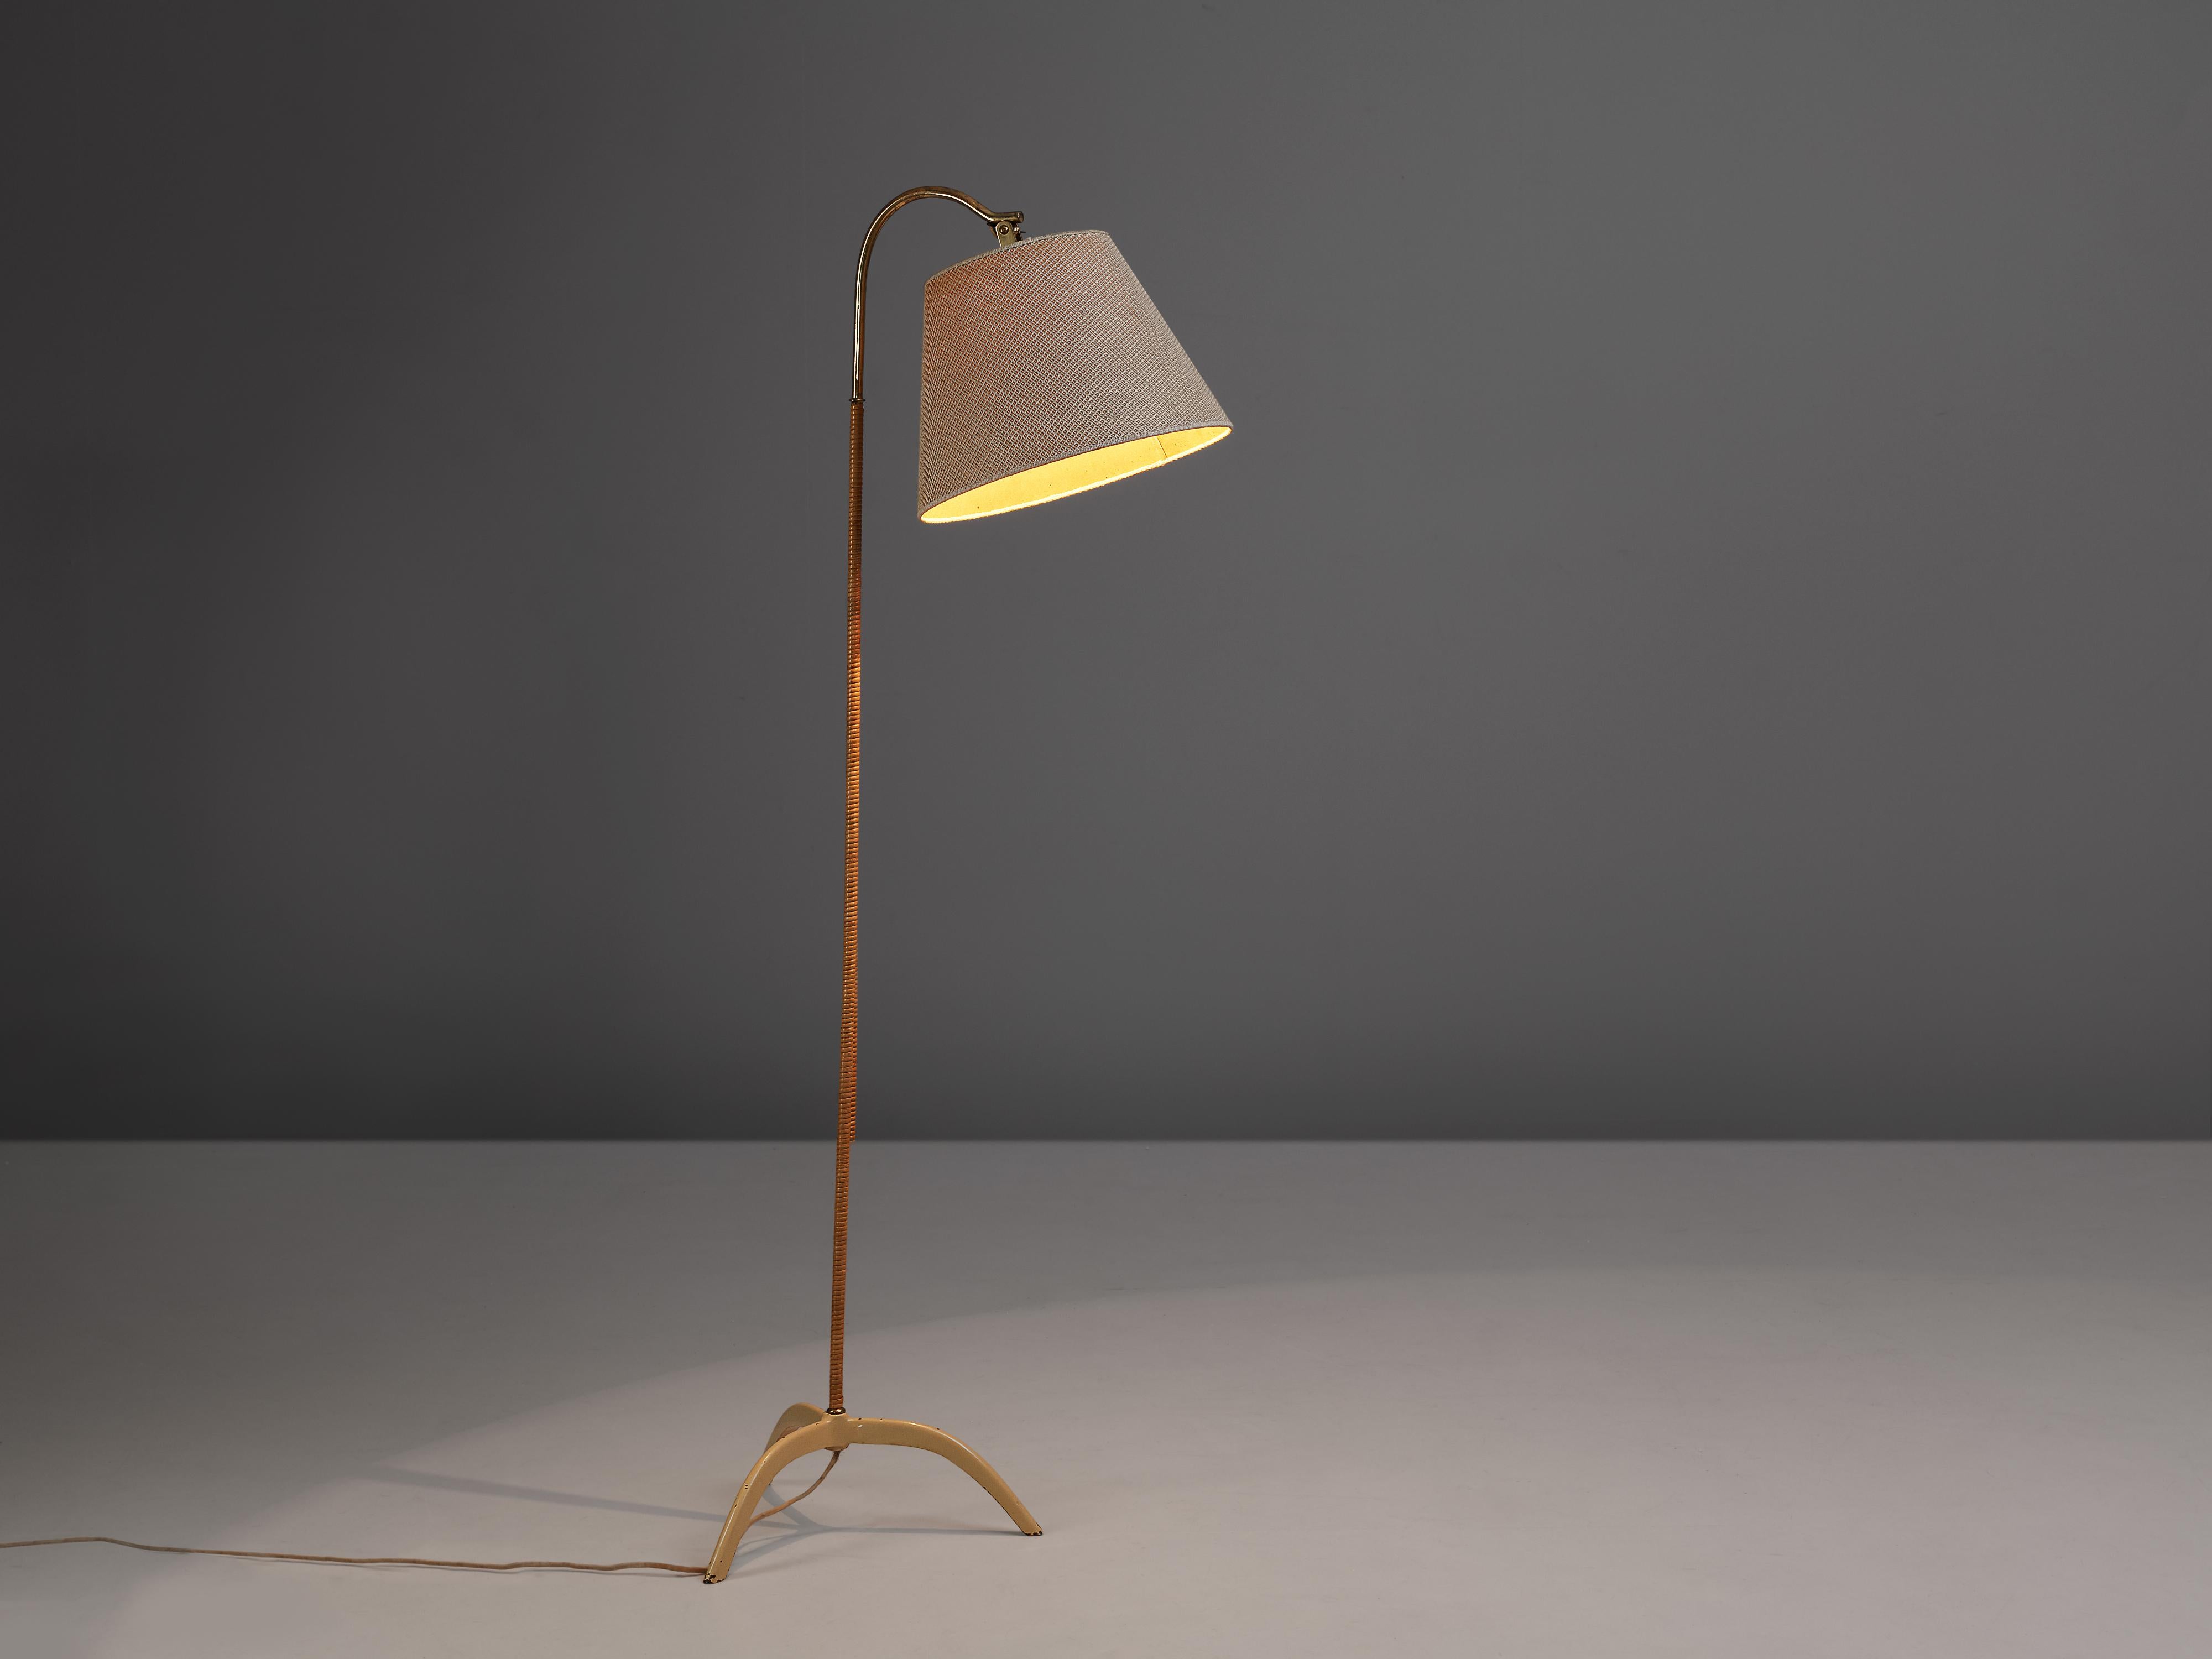 Paavo Tynell for Taito, floor lamp model 9609, metal, brass, cane, fabric, Finland, 1950s

The floor lamp model 9609 by Finish designer Paavo Tynell is a visual pleasure in many senses. Firstly, the surprising lines of the tripod base. In for